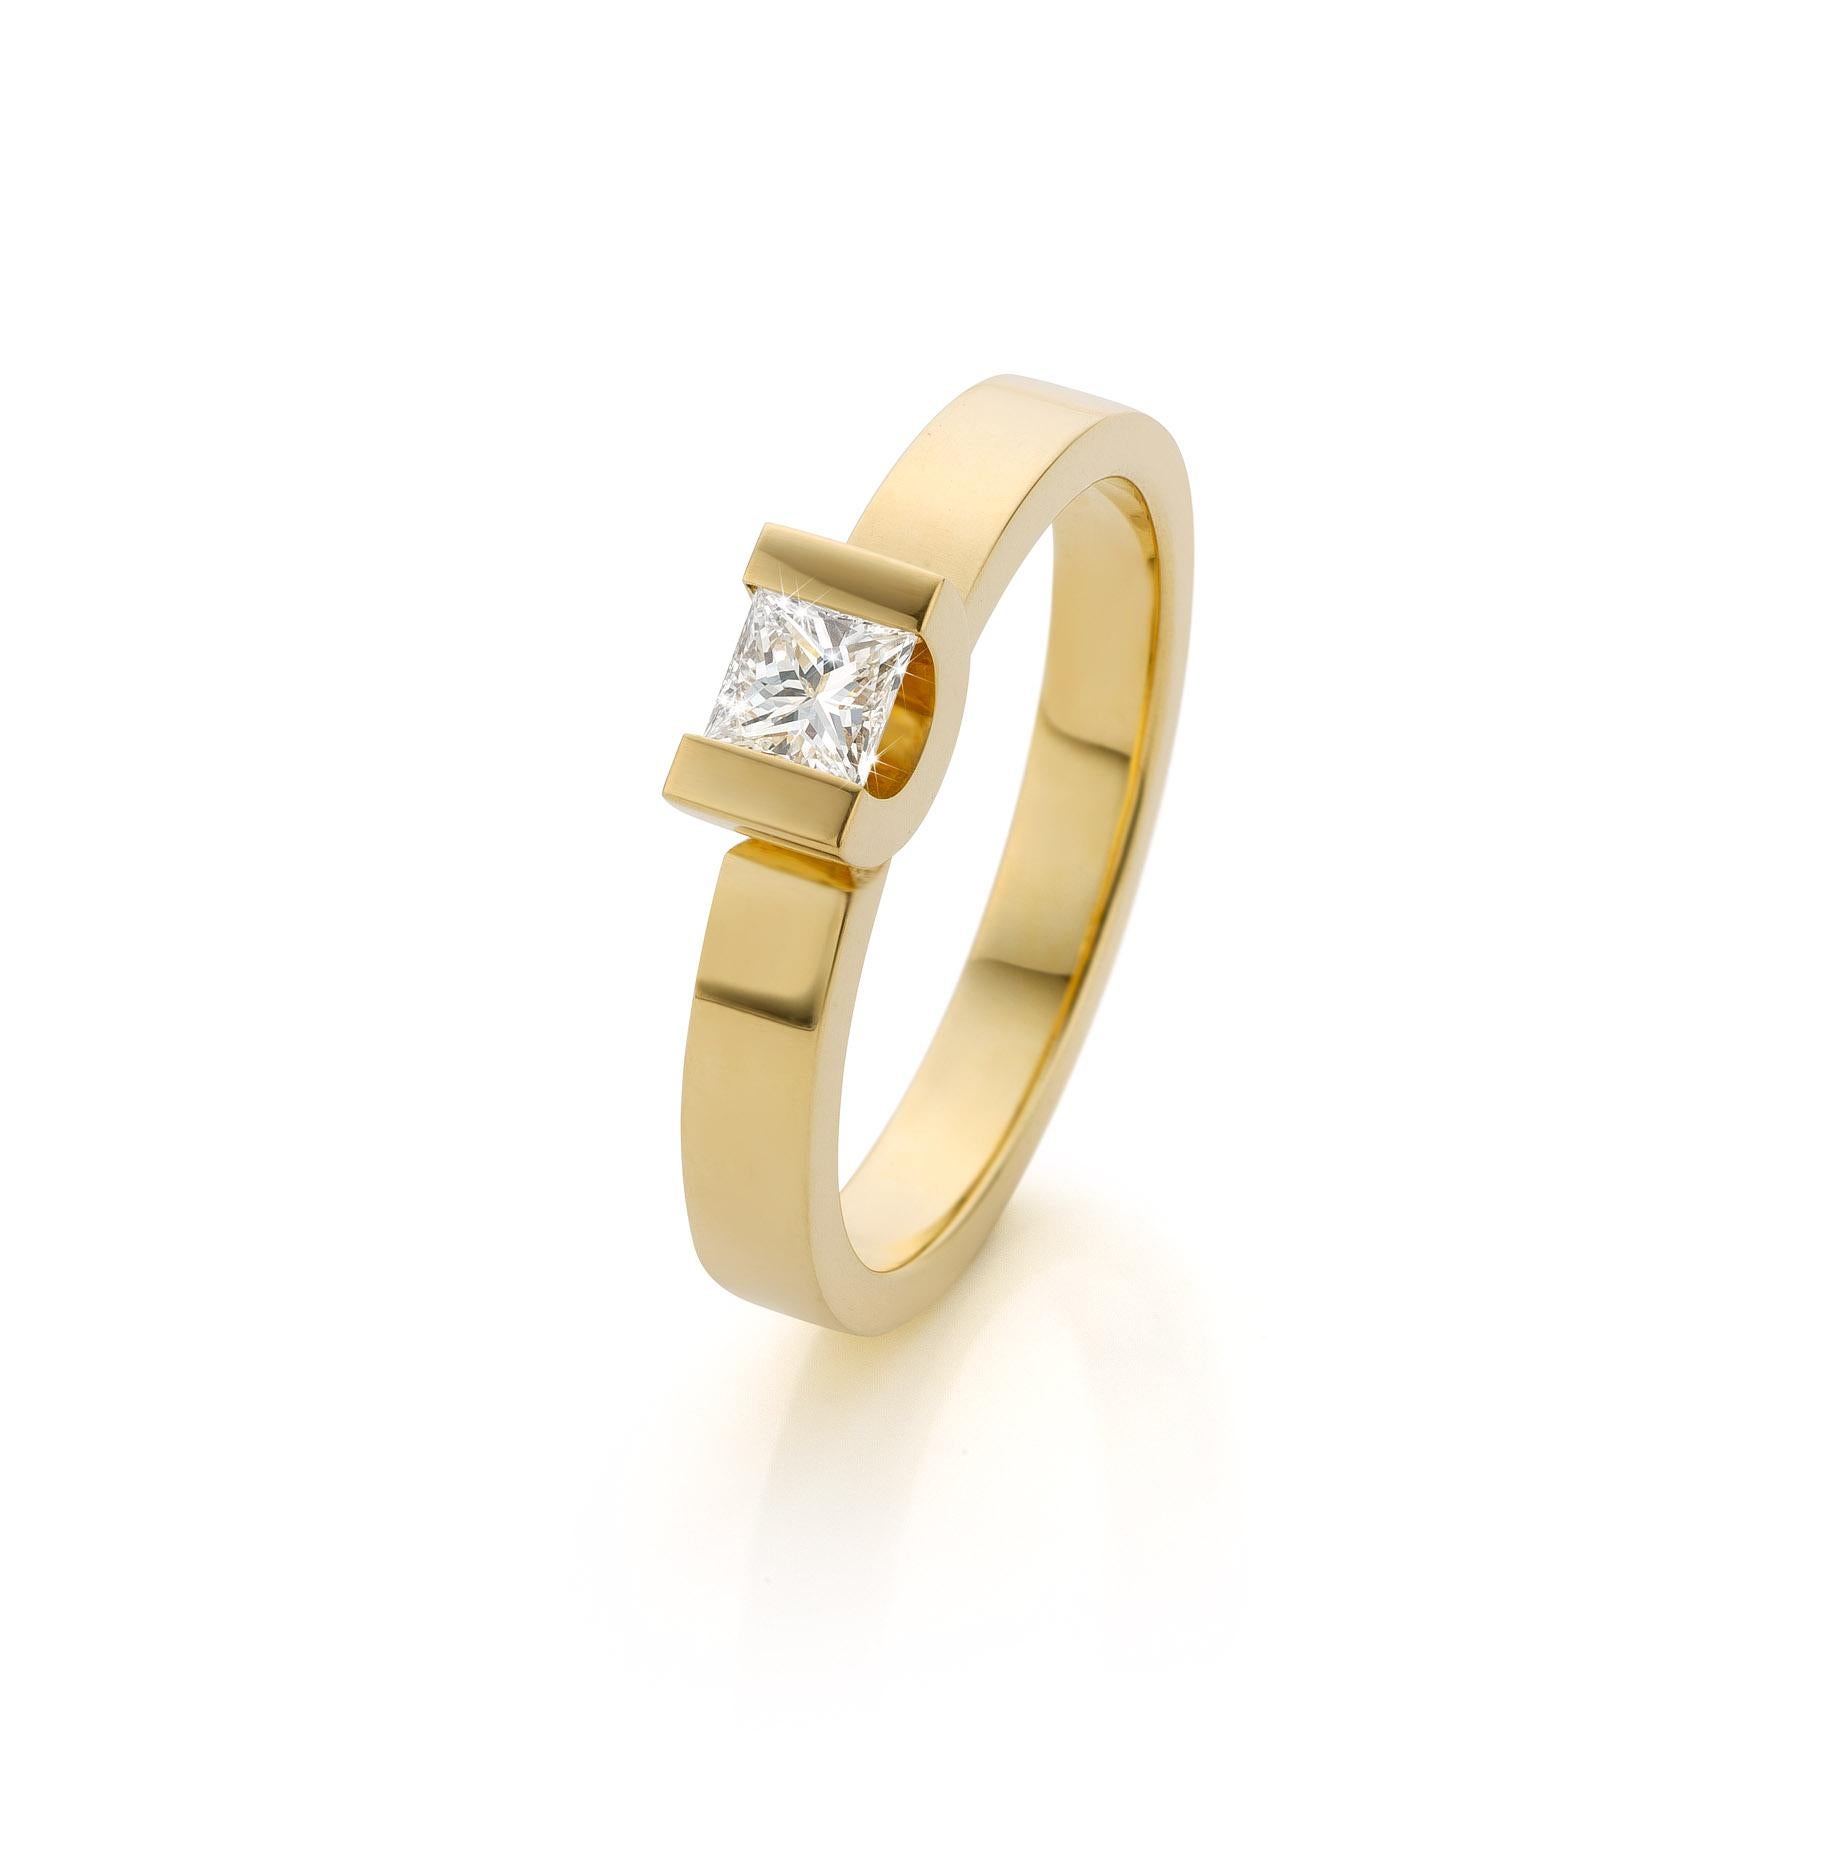 For Sale:  Cober Jewellery with Princess Cut Diamond Modern Engagement Ring Total Handmade 5